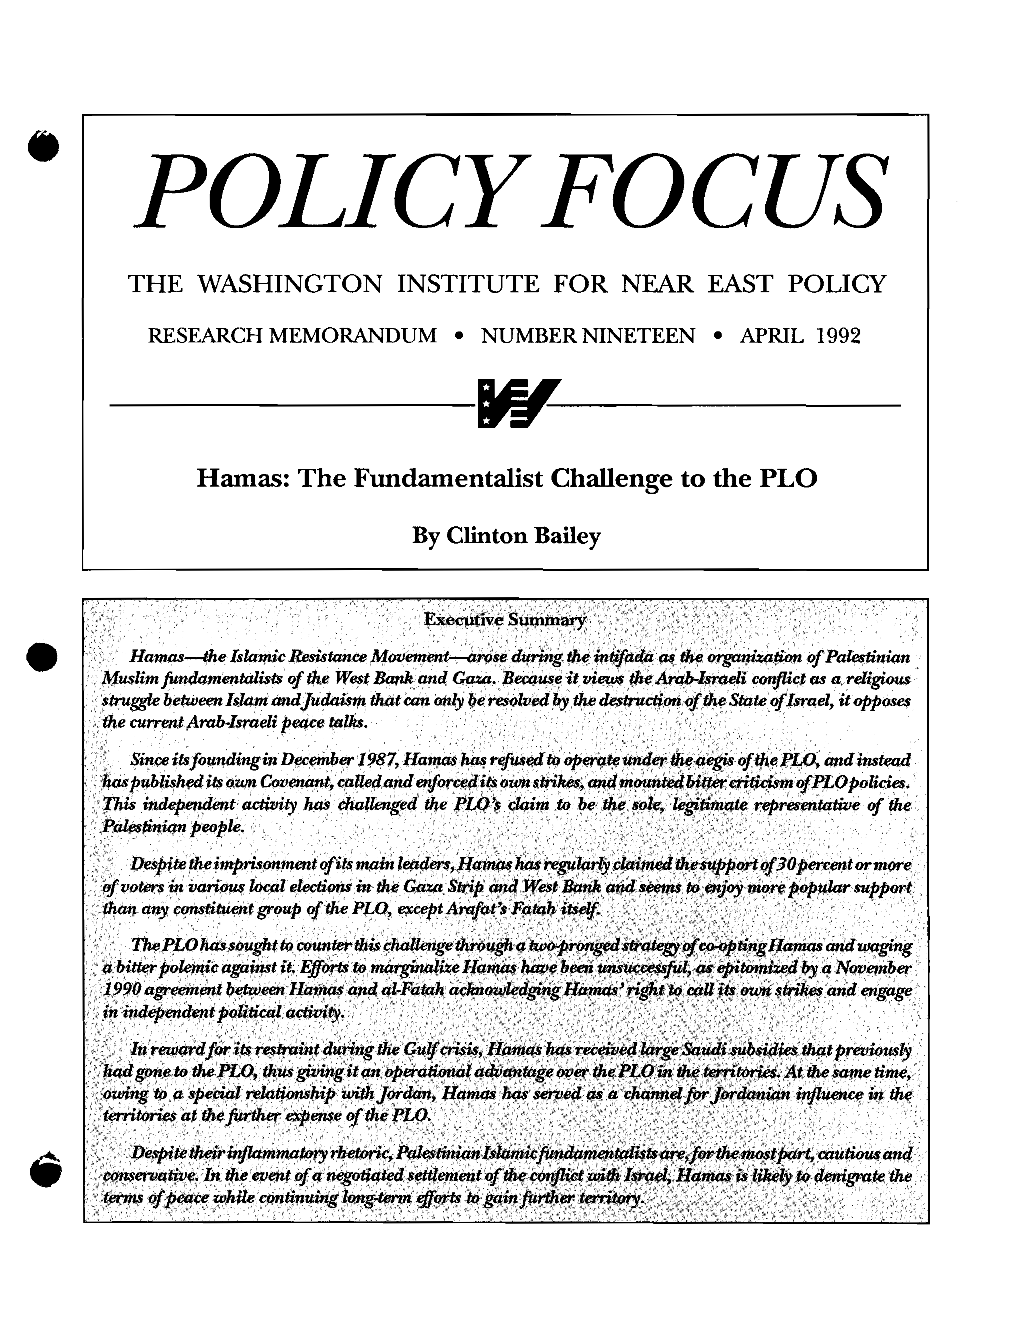 Policyfocus the Washington Institute for Near East Policy